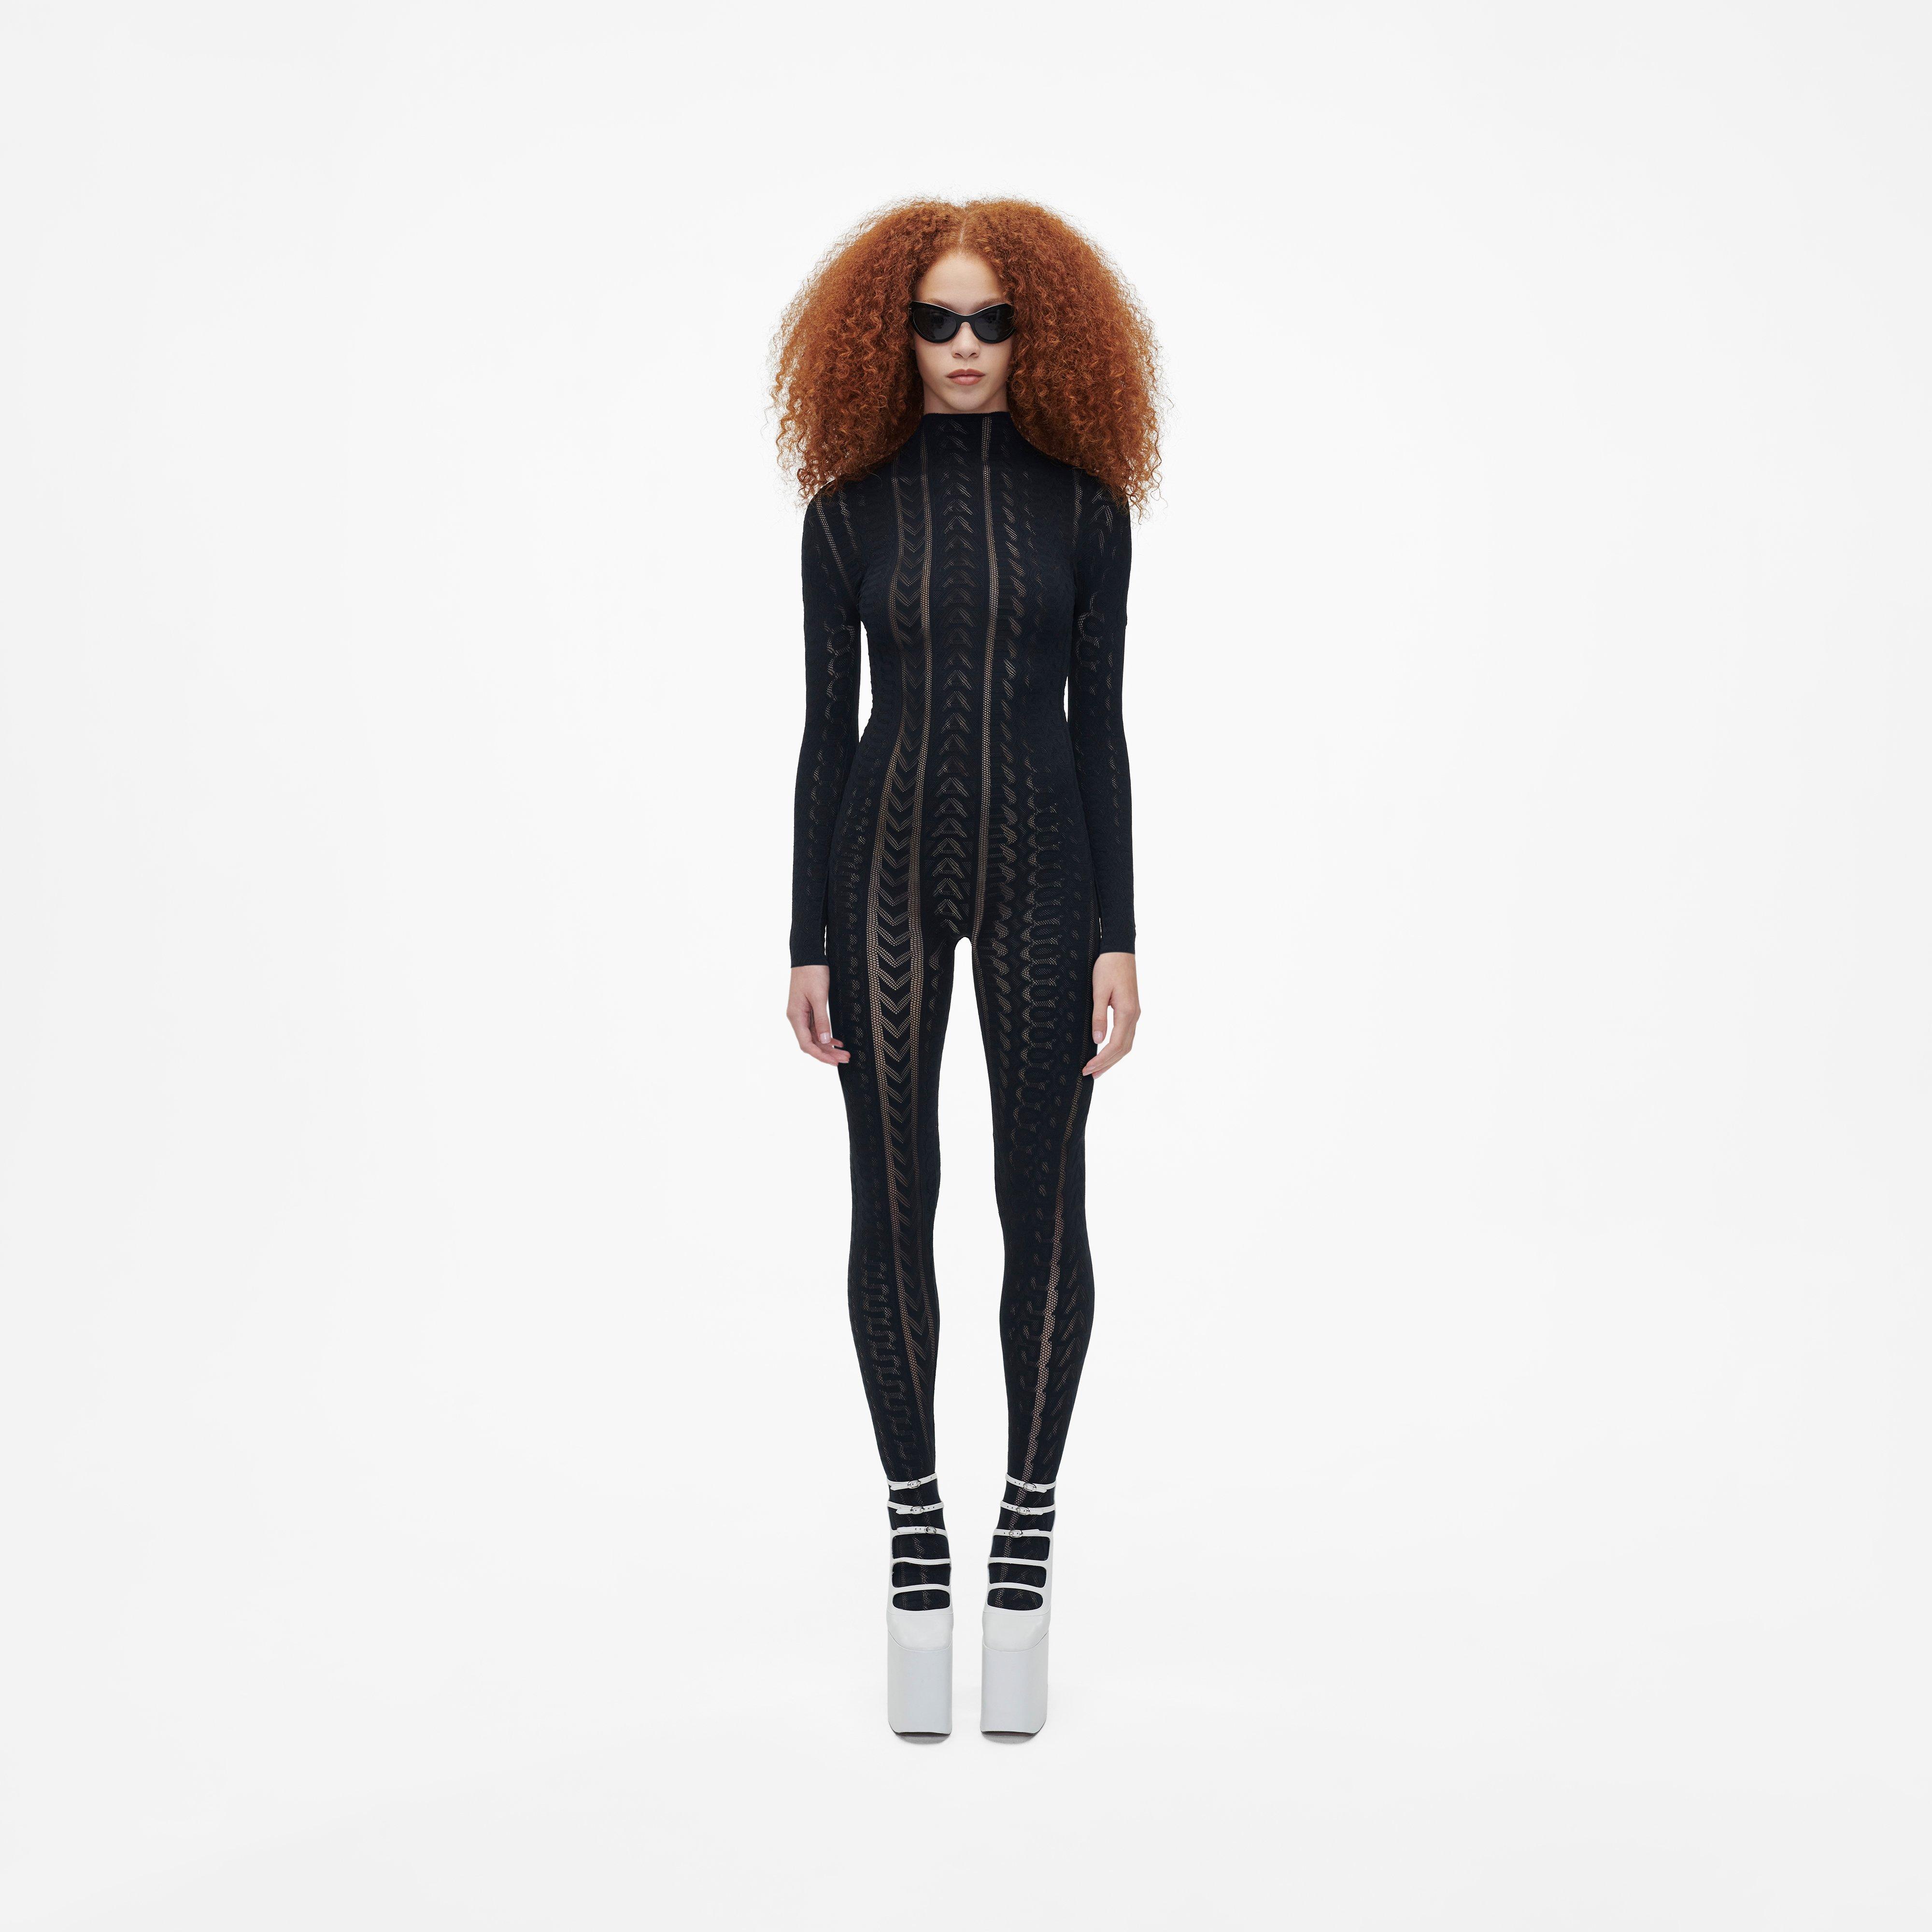 Marc by Marc jacobs Seamless Catsuit,BLACK